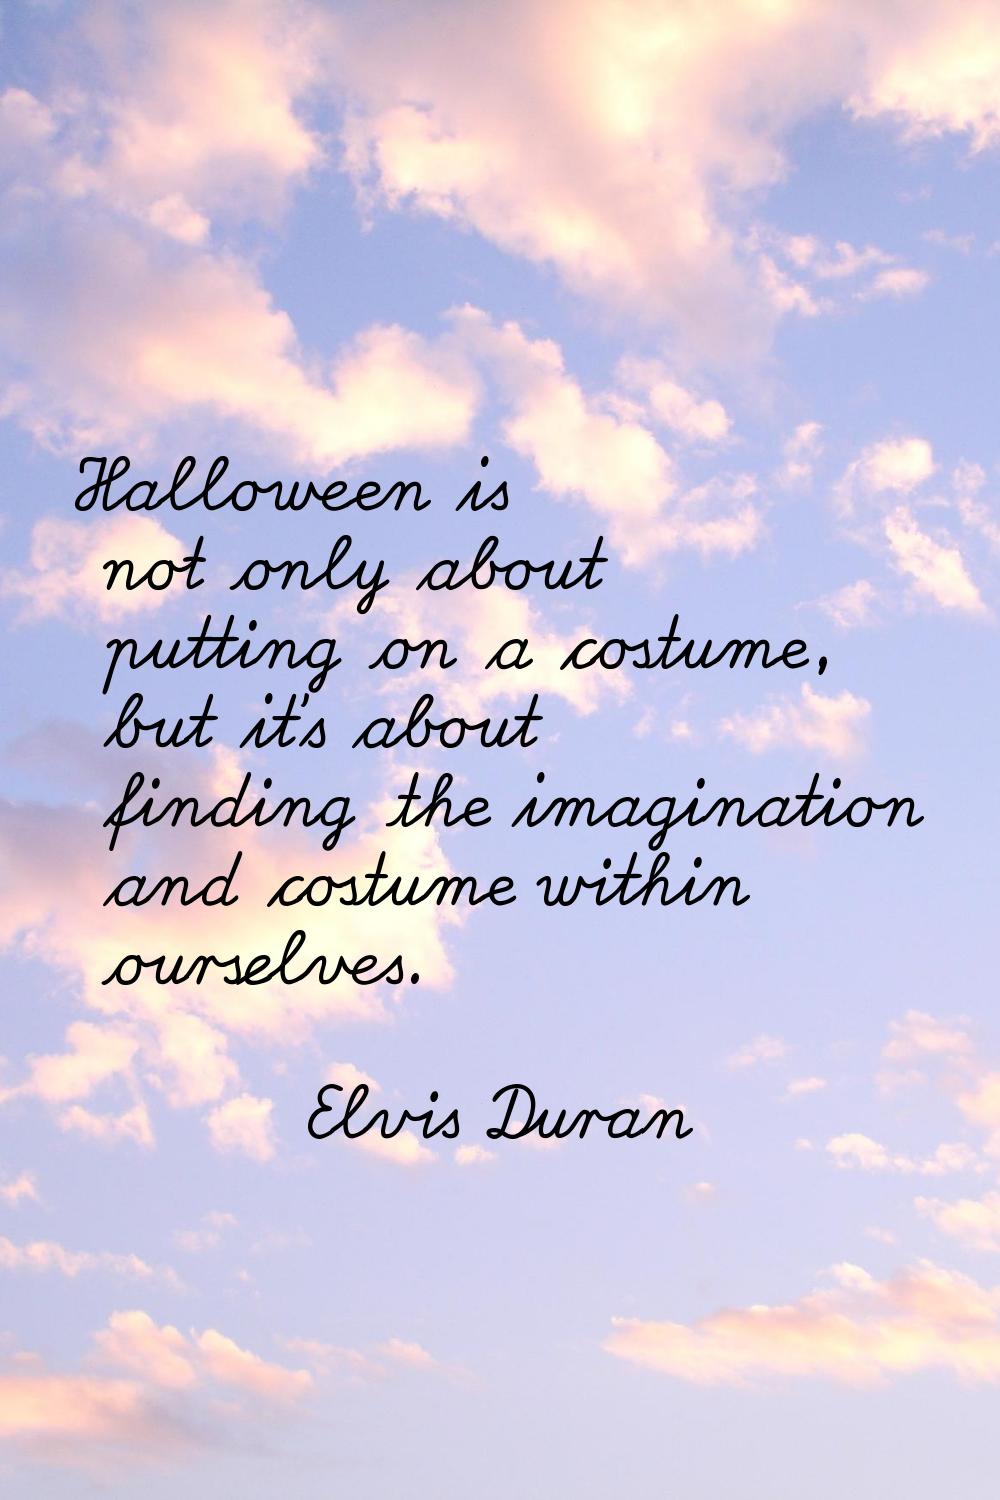 Halloween is not only about putting on a costume, but it's about finding the imagination and costum